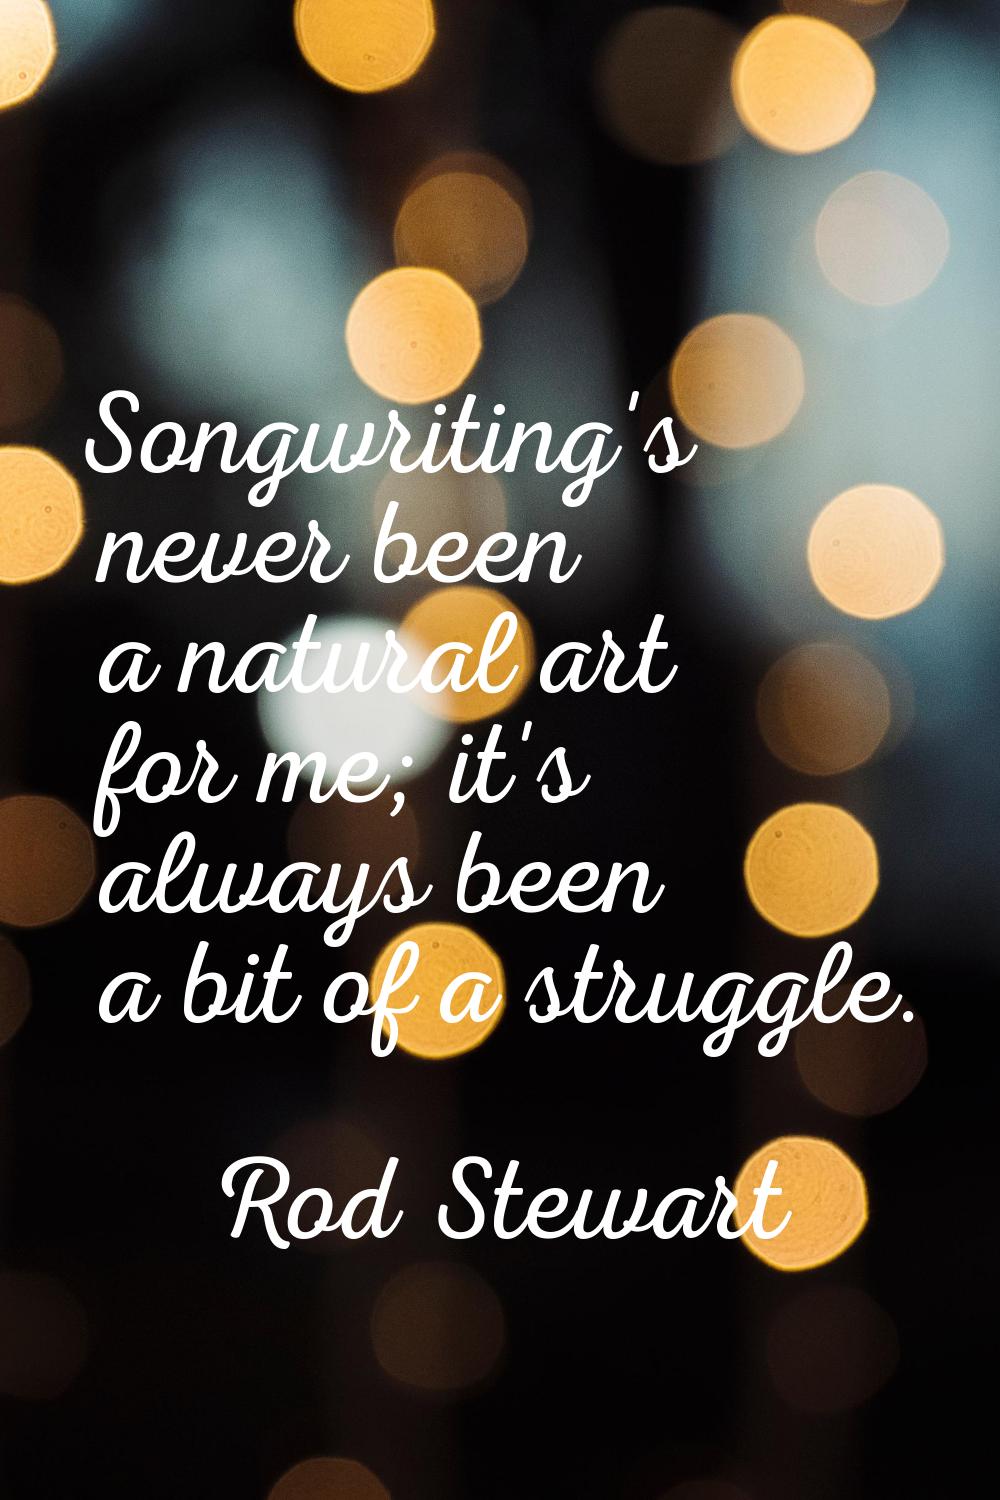 Songwriting's never been a natural art for me; it's always been a bit of a struggle.